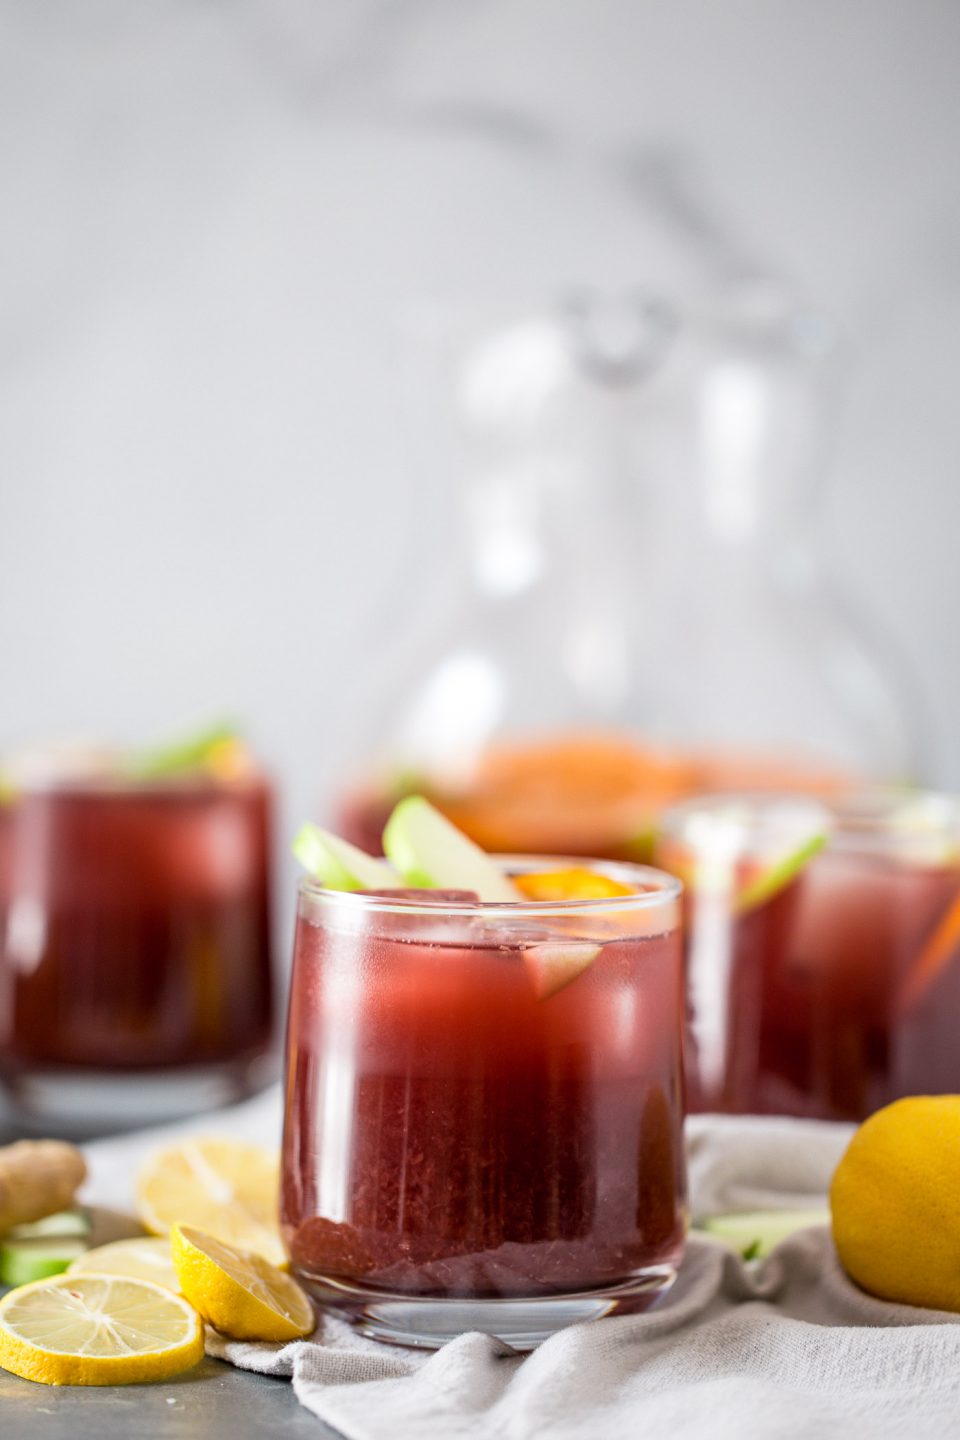 this two buck chuck sangria is an easy & inexpensive red wine sangria recipe featuring trader joe’s famous charles shaw wine. make two buck chuck sangria one pitcher at a time - the perfect drink to serve at girls night, holiday parties, dinner parties, & more! #playswellwithbutter #sangria #drinkrecipe #twobuckchuck #traderjoes #traderjoesrecipe